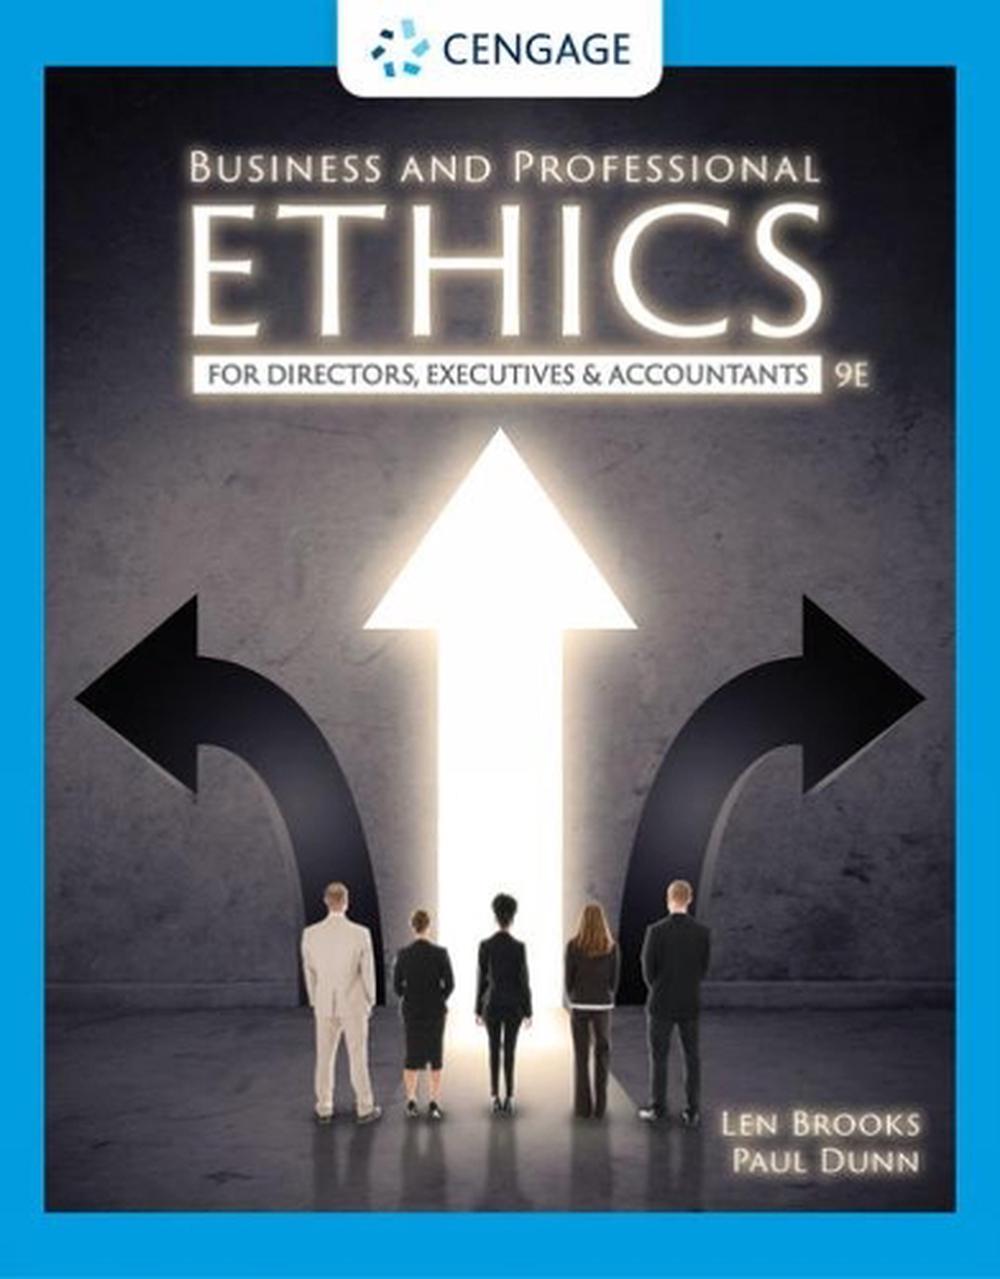 9780357441886　Ethics,　Paperback,　online　Paul　by　The　Buy　Professional　and　Business　at　Dunn,　9th　Edition　Nile